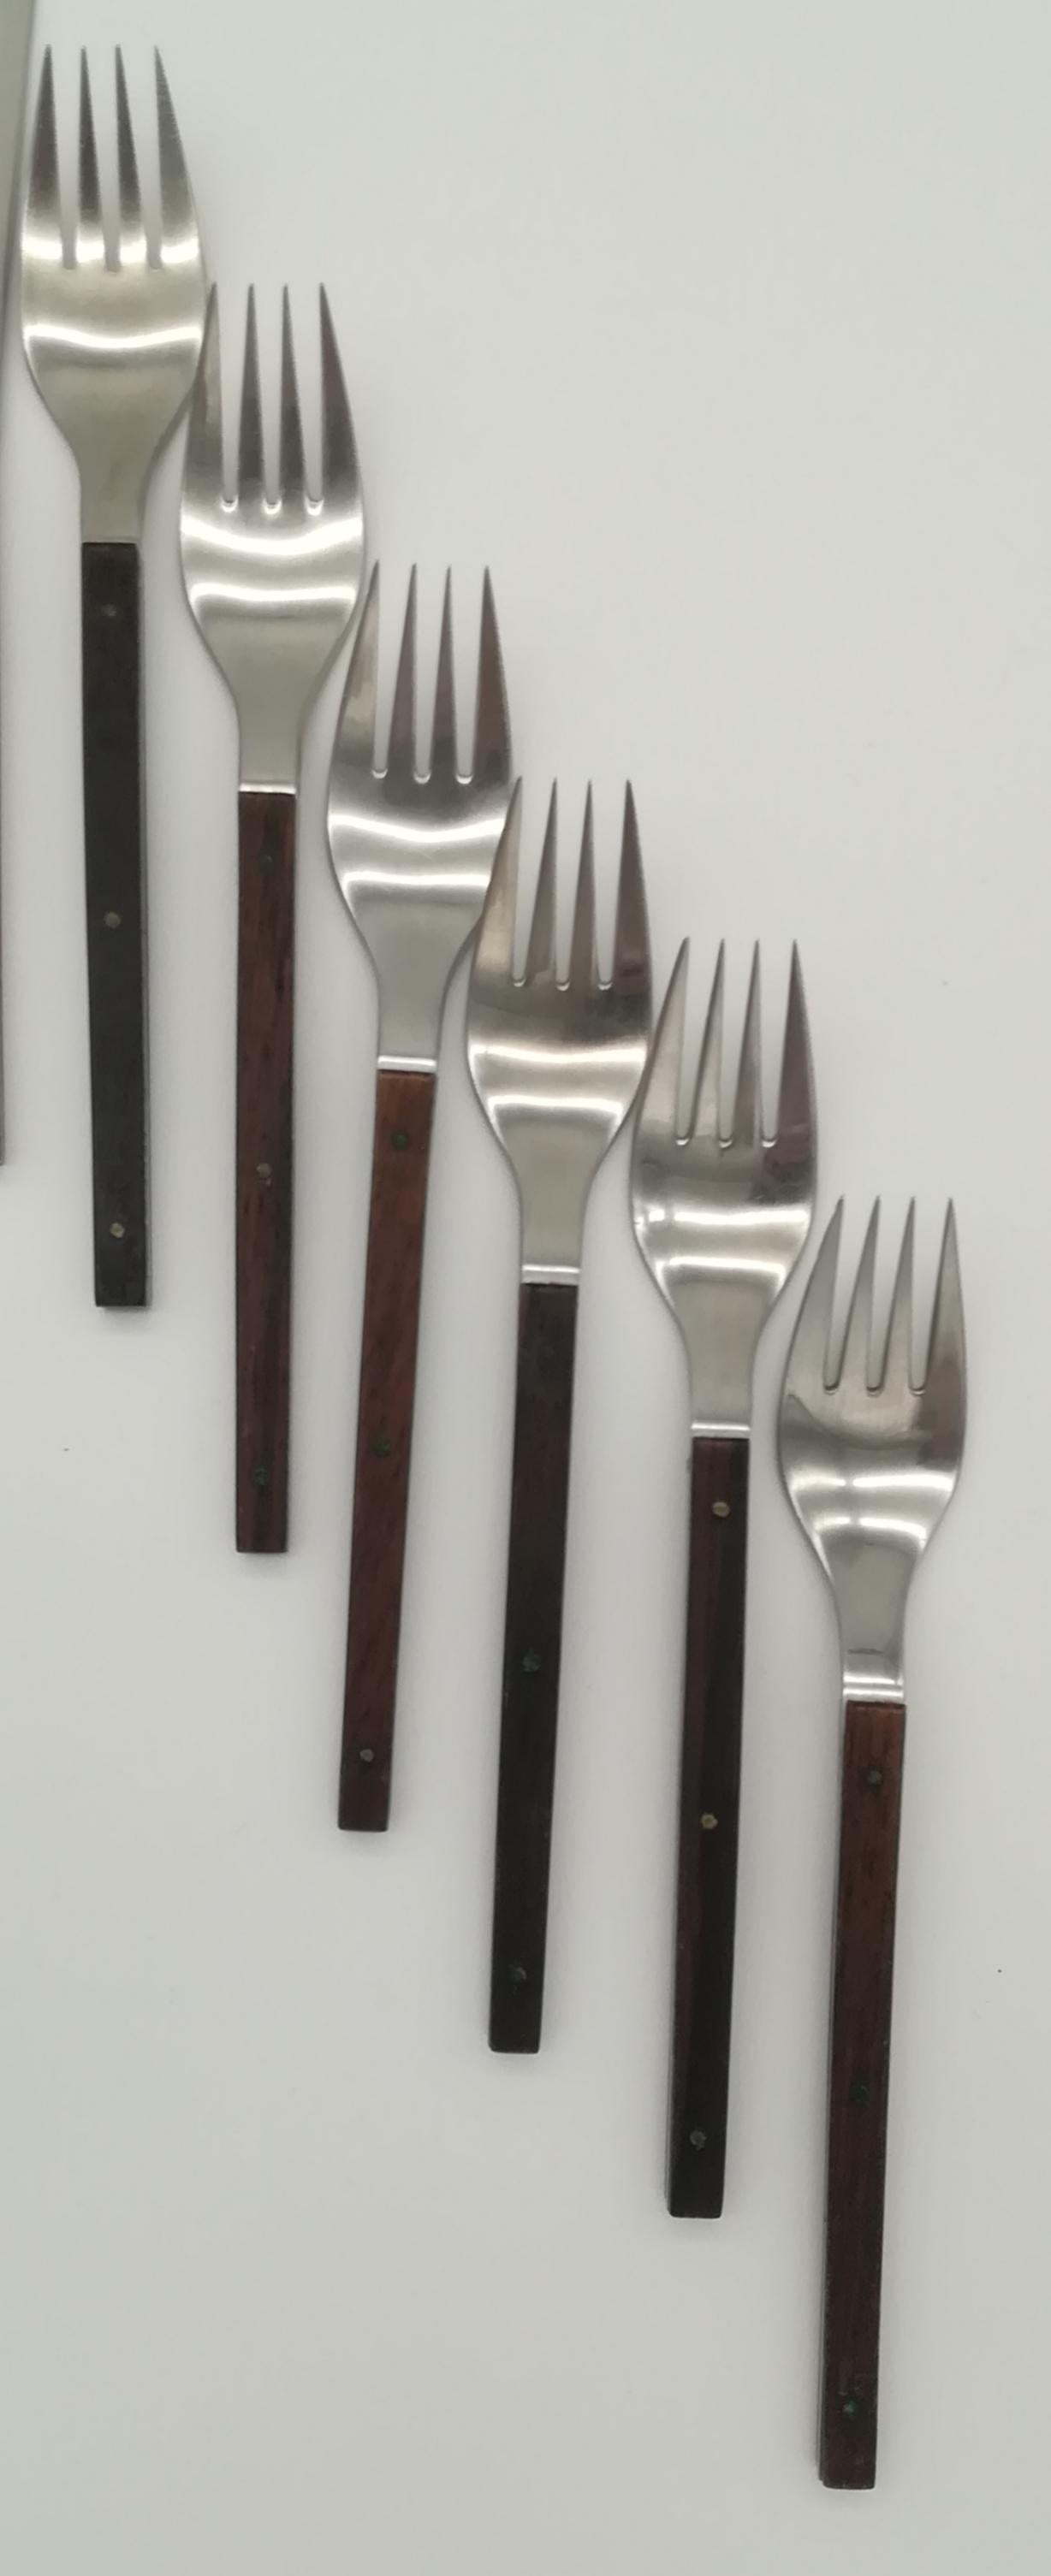 This timeless cutlery/flatware set from the 1960s-70s was designed by Helmut Alder for Esta - a Sub-brand of well-known Amboss Neuzeughammer Austria - on the occasion of the 200th anniversary of the company Neuzeughammer Steyr in 1969.
Helmut